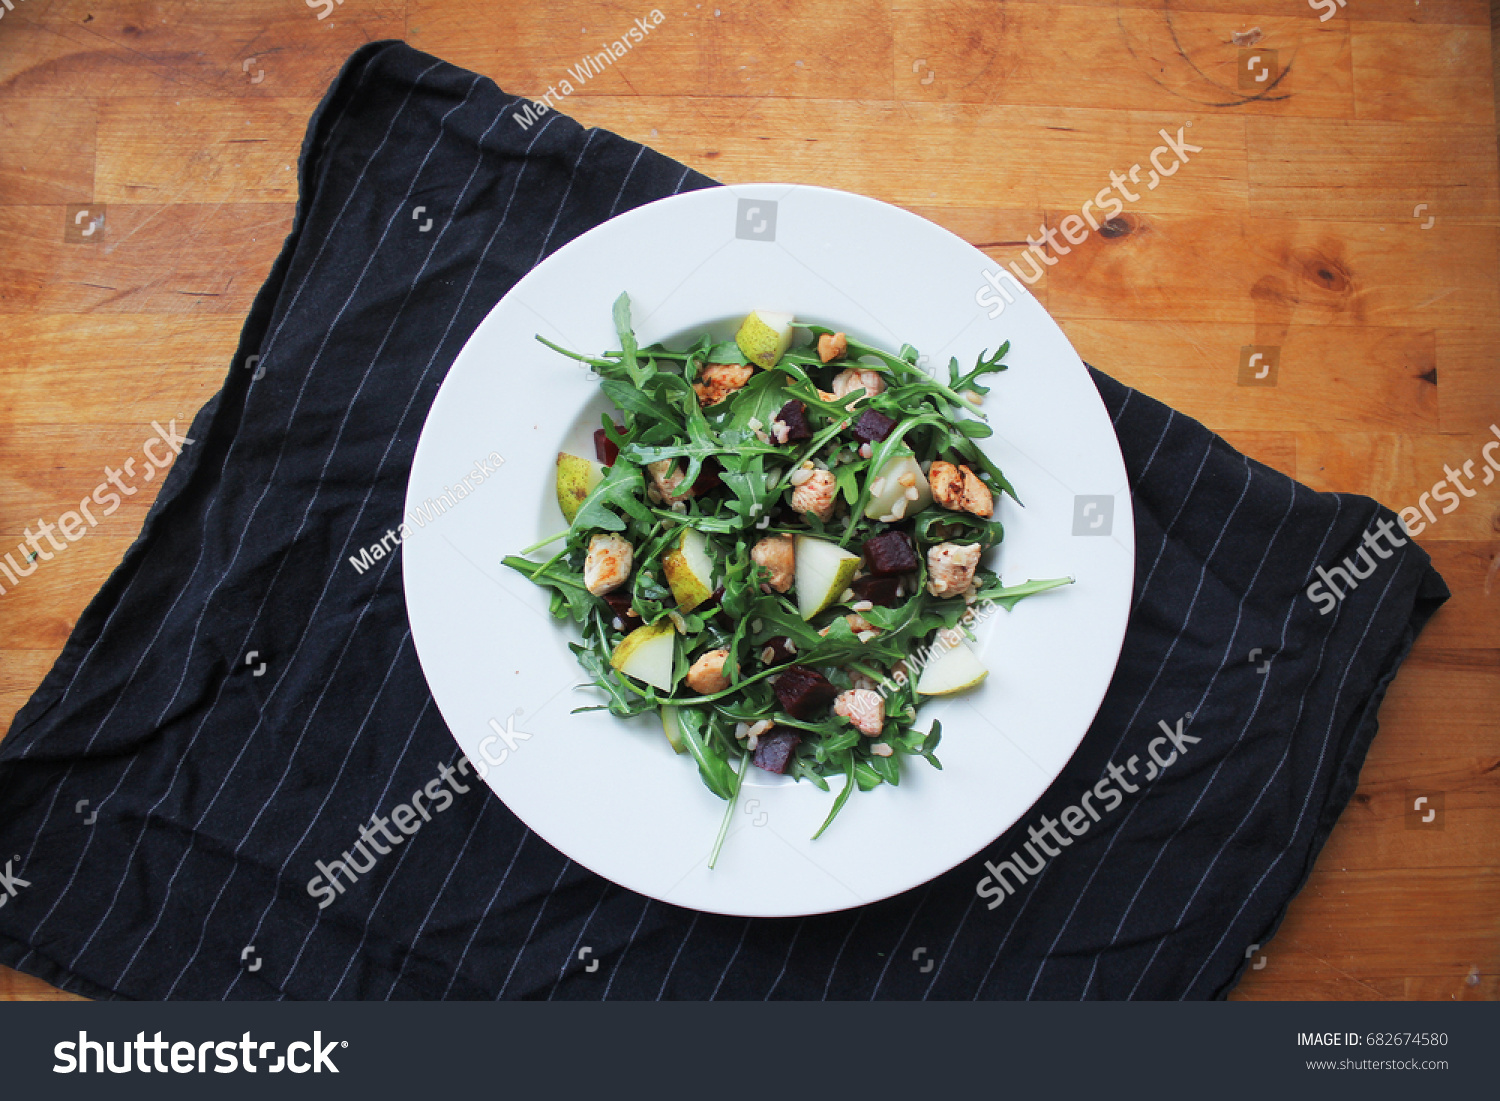 fresh arugula salad with chicken pear and beetroot #682674580